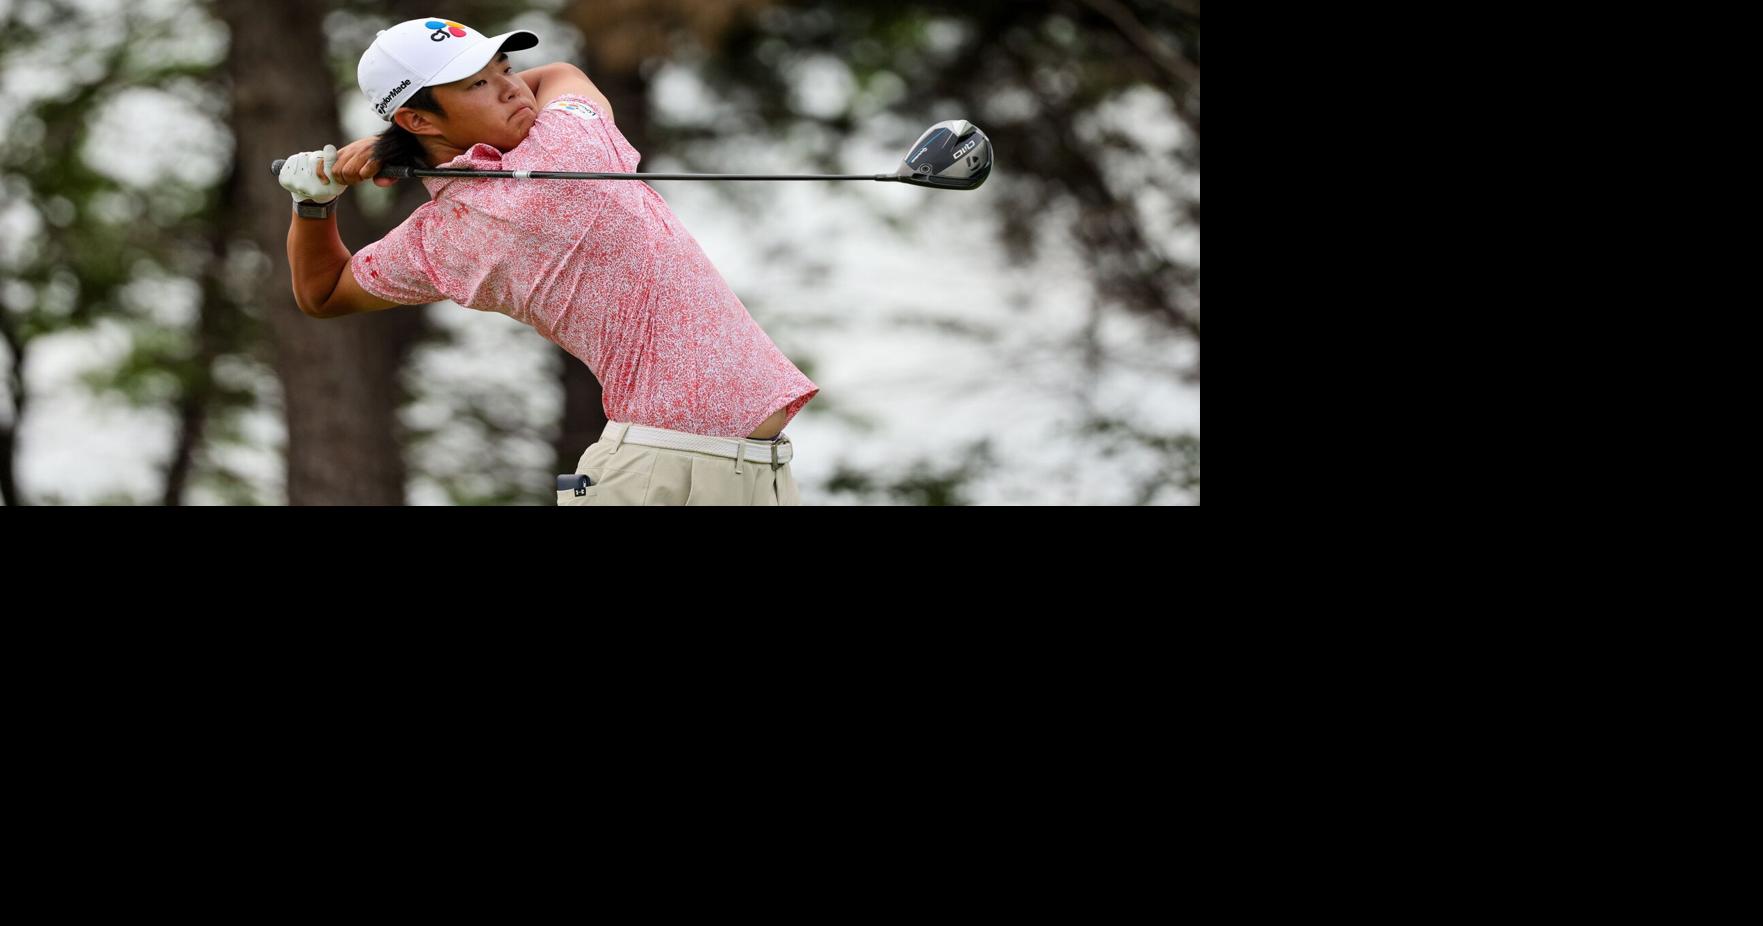 16-year-old amateur Kris Kim impresses the golf world by making the cut in his PGA Tour debut